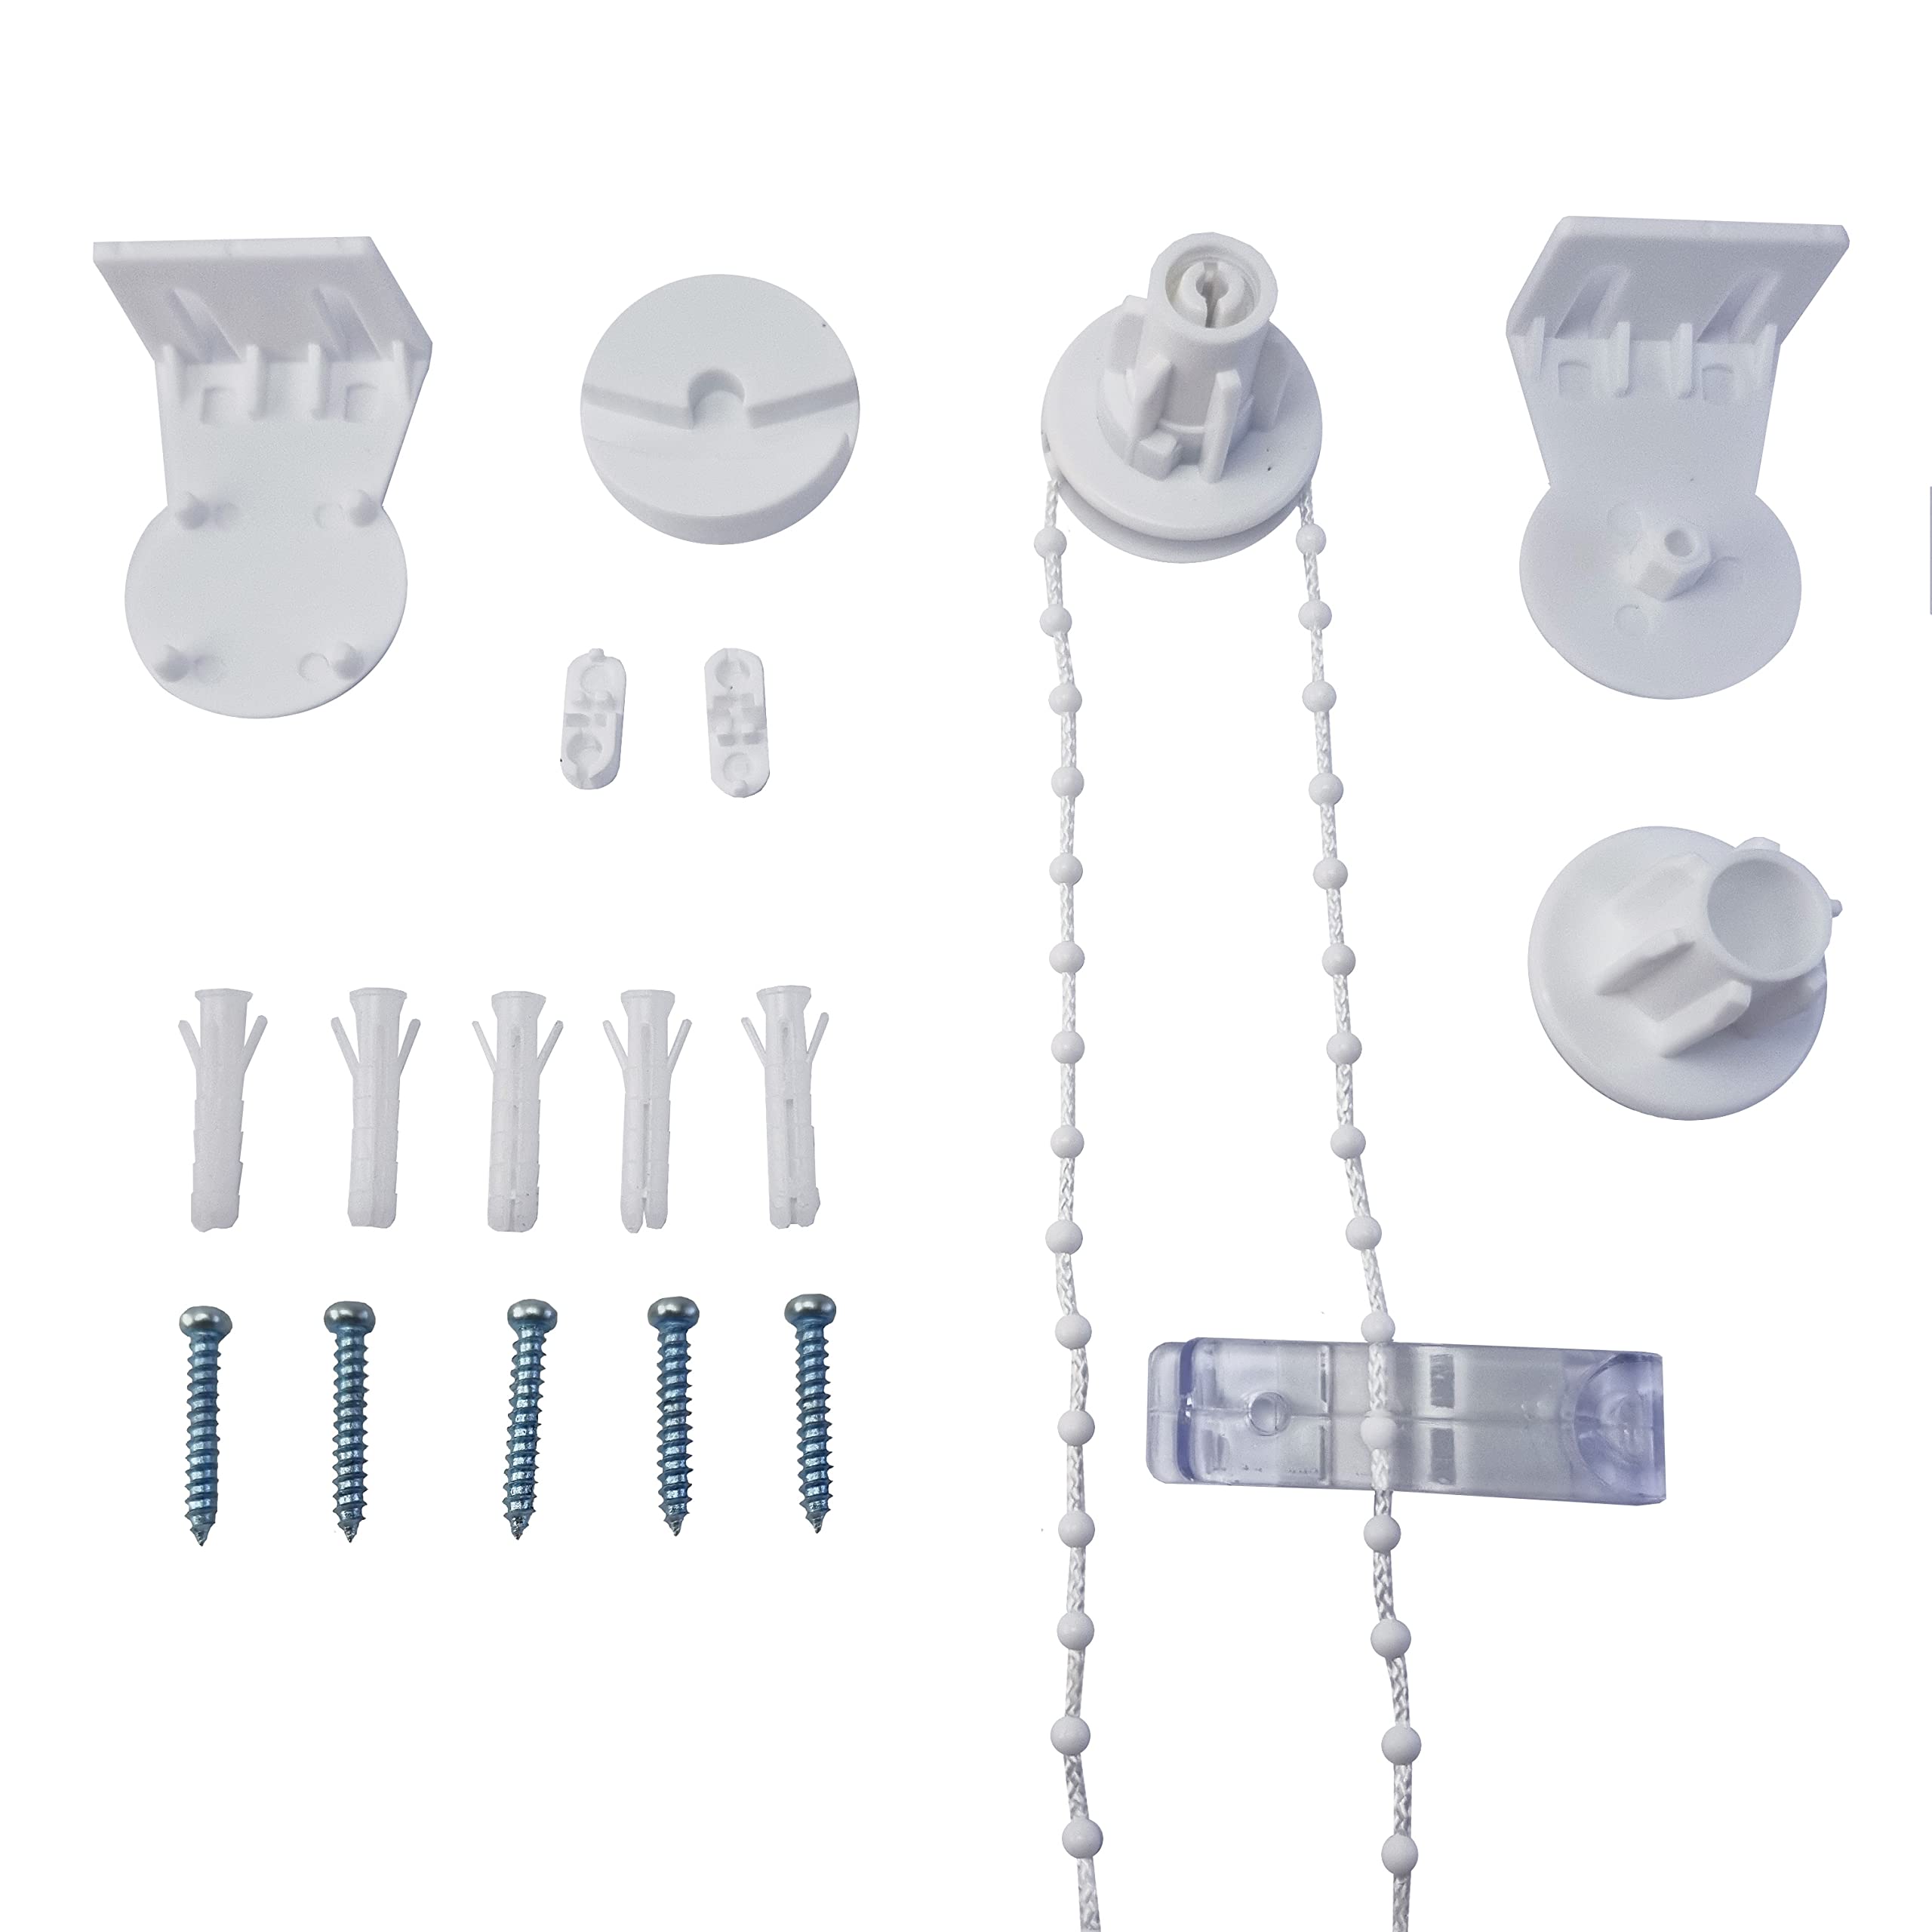 FURNISHED Roller Blind Fittings Replacement Repair Kit 25mm Child Safe Spare